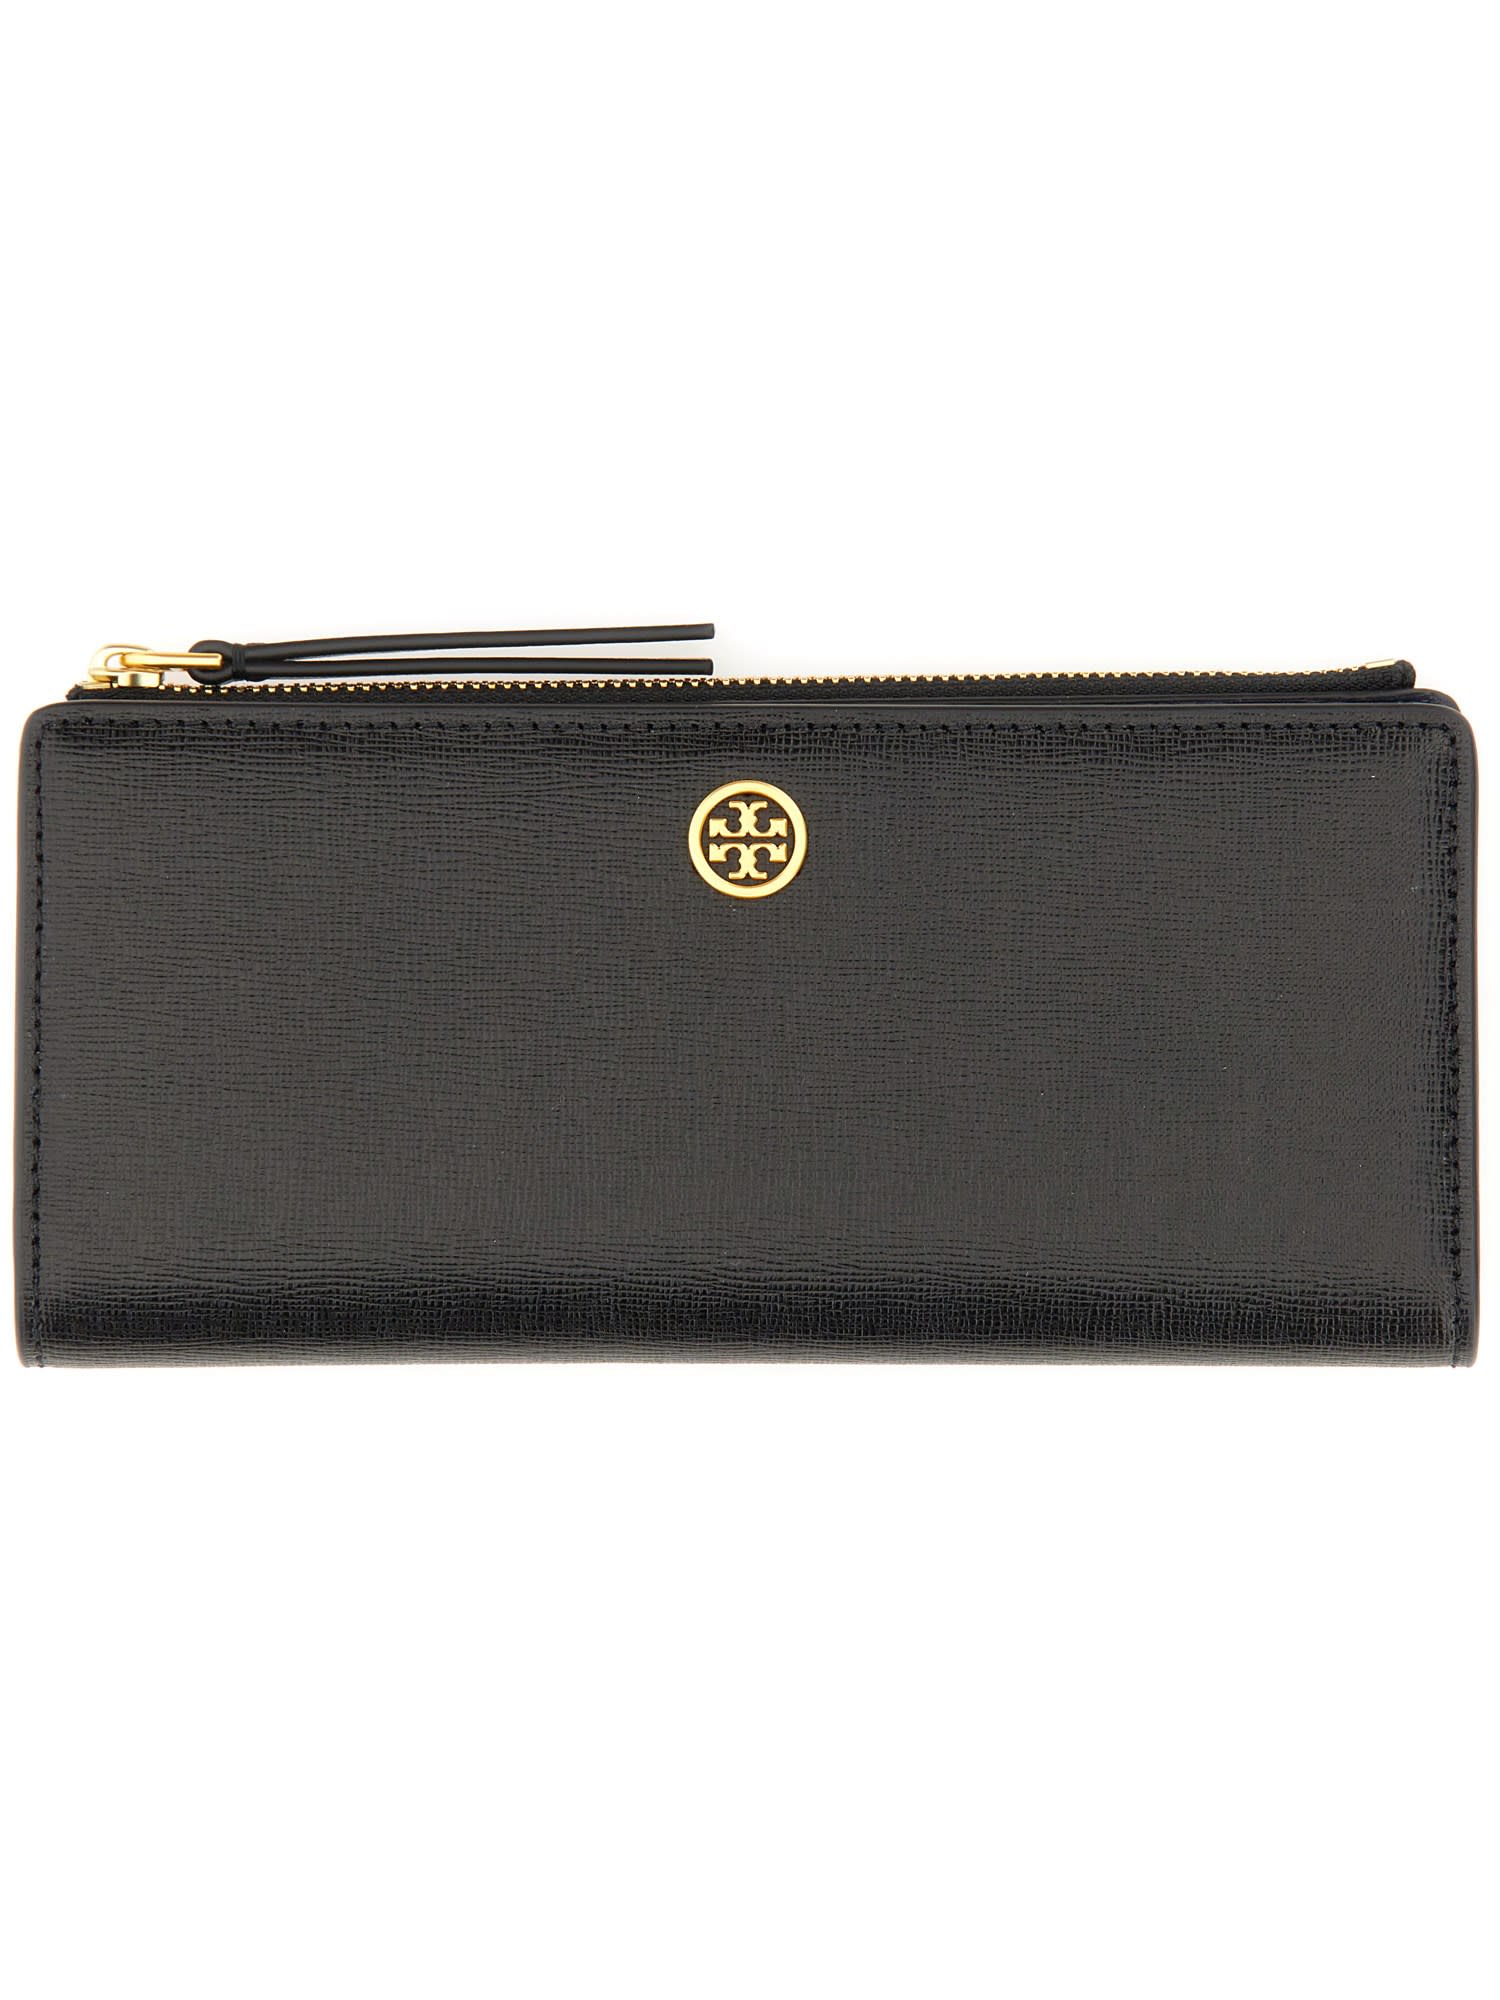 TORY BURCH ROBINSON LEATHER WALLET